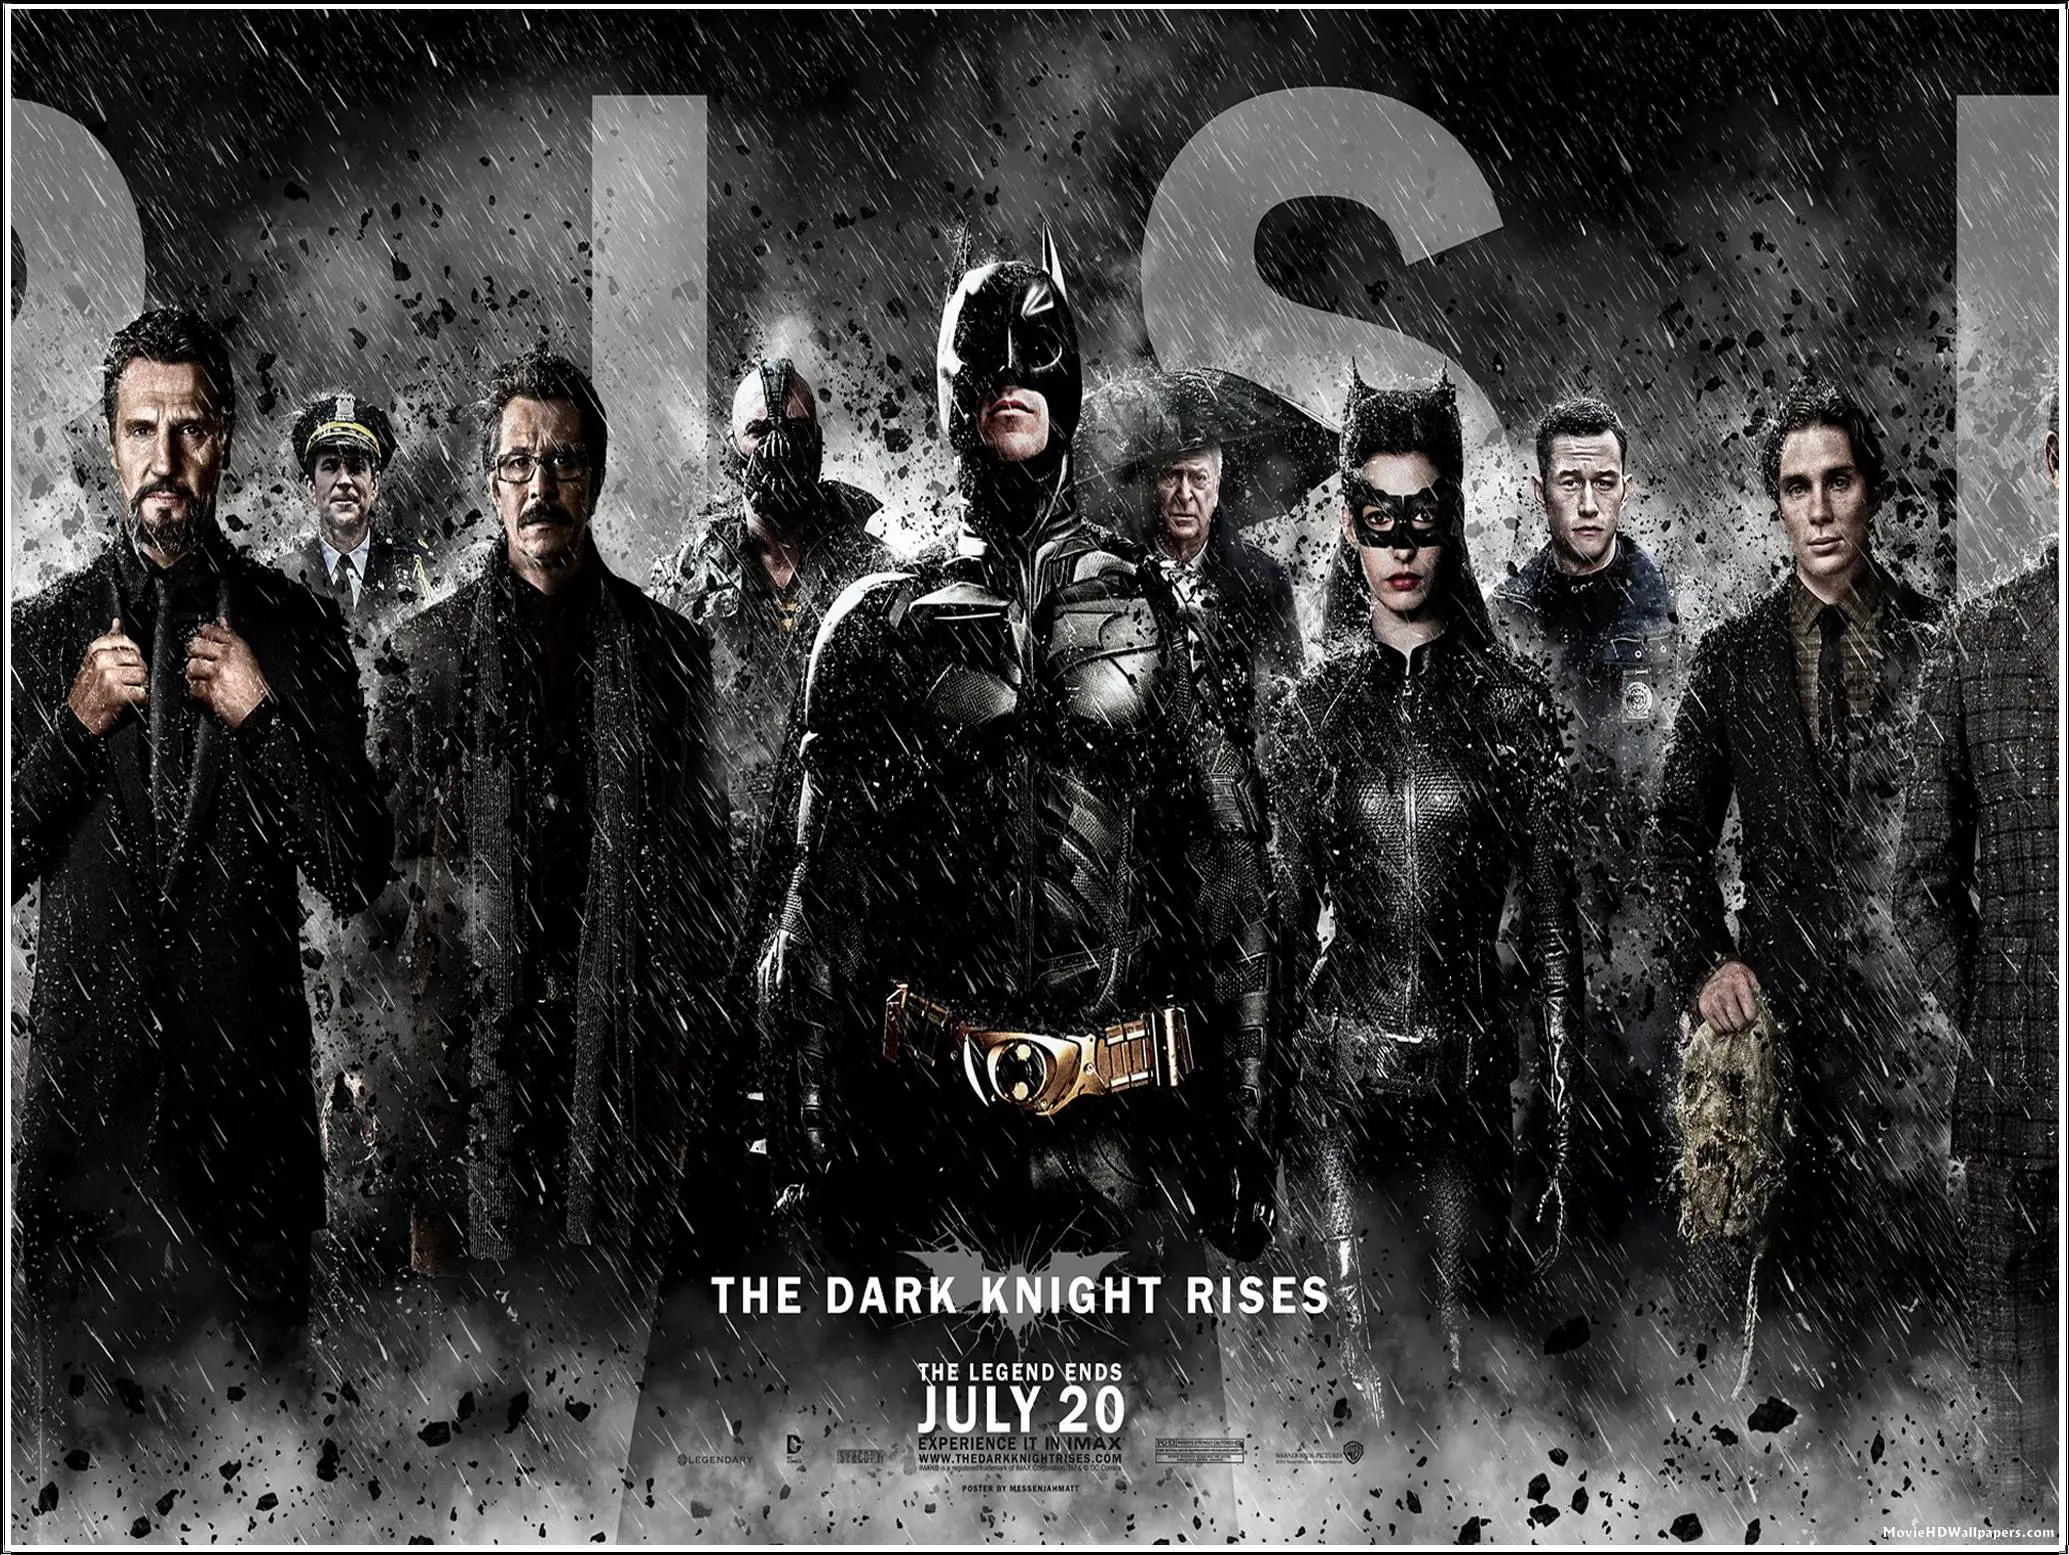 The Dark Knight Rises (2012) Posters